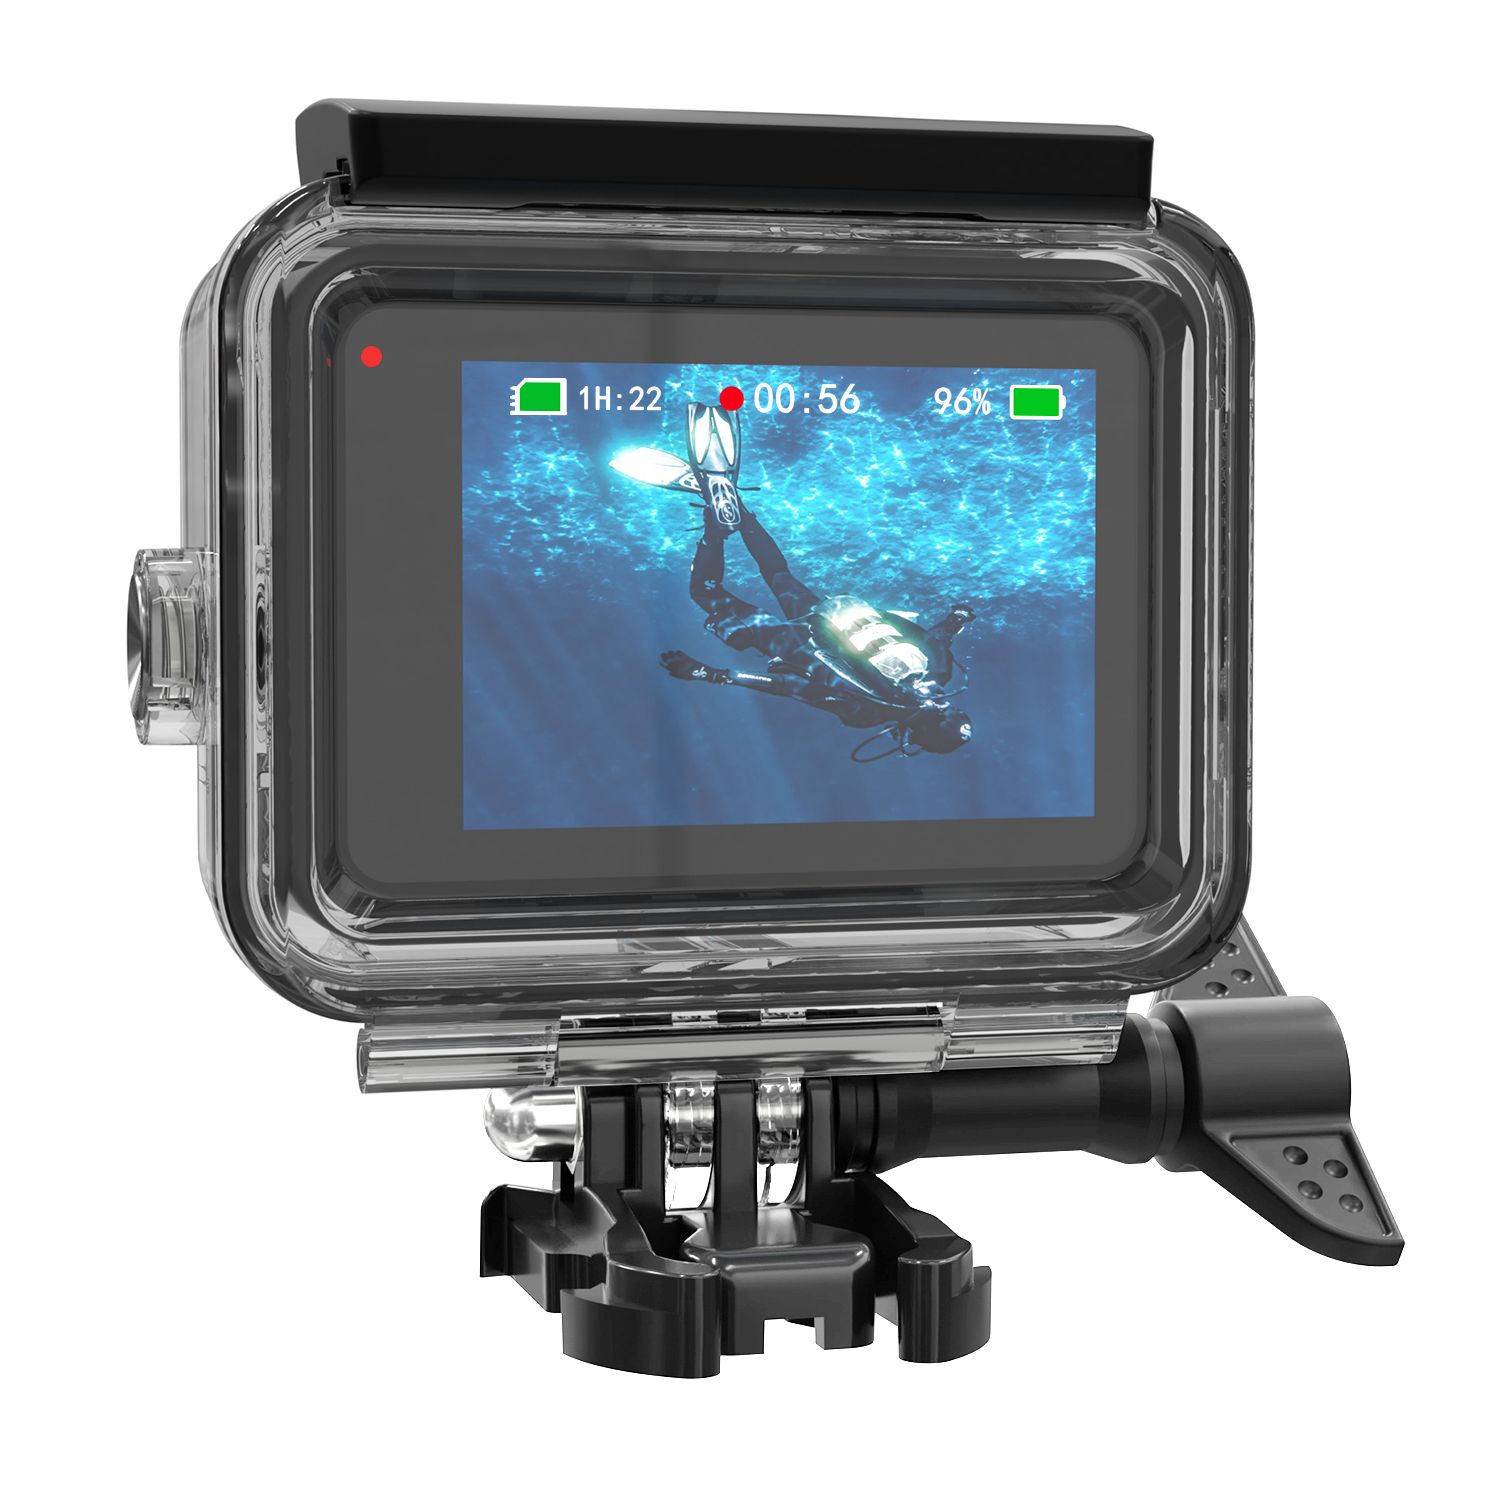 Sheingka-60m-Waterproof-Housing-Shell-Protective-Cover-for-GoPro-HERO-8-Black-Hard-Protective-Case-S-1677266